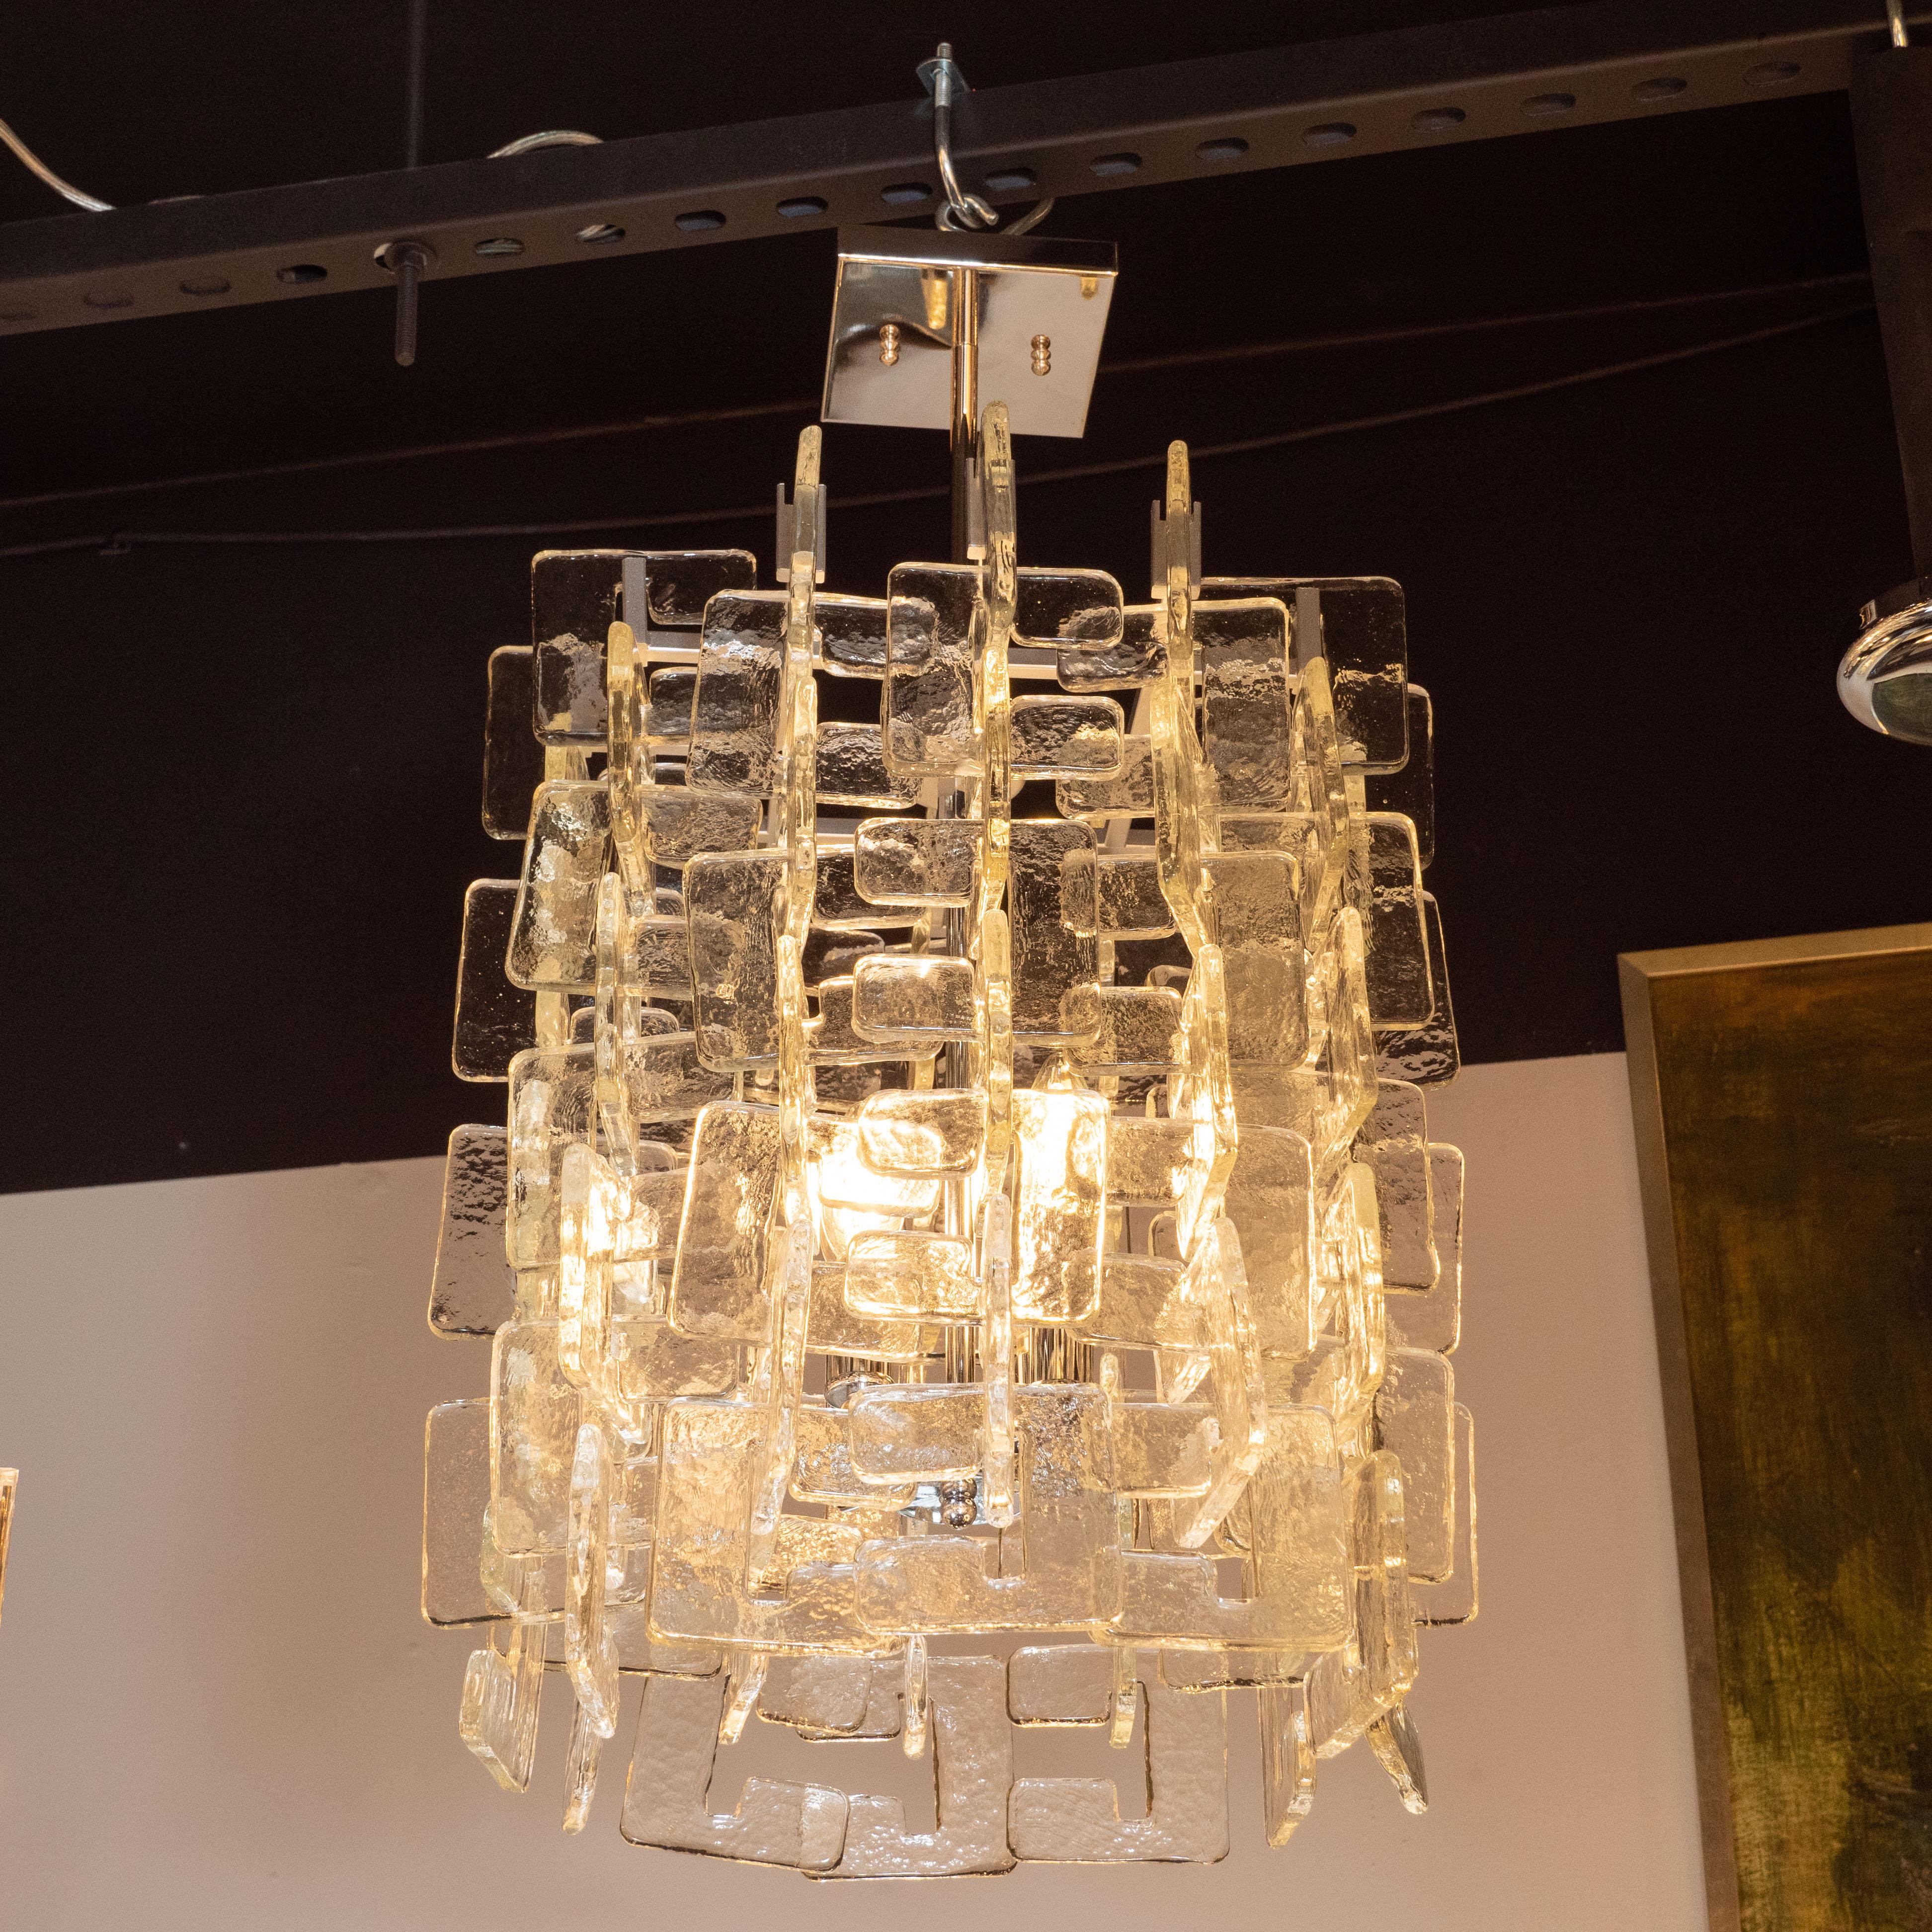 This gorgeous modernist chandelier was realized in Murano, Italy- the island off the coast of Venice renowned for centuries for its superlative glass production. It features an abundance of translucent c-shaped shades that elegantly interlock